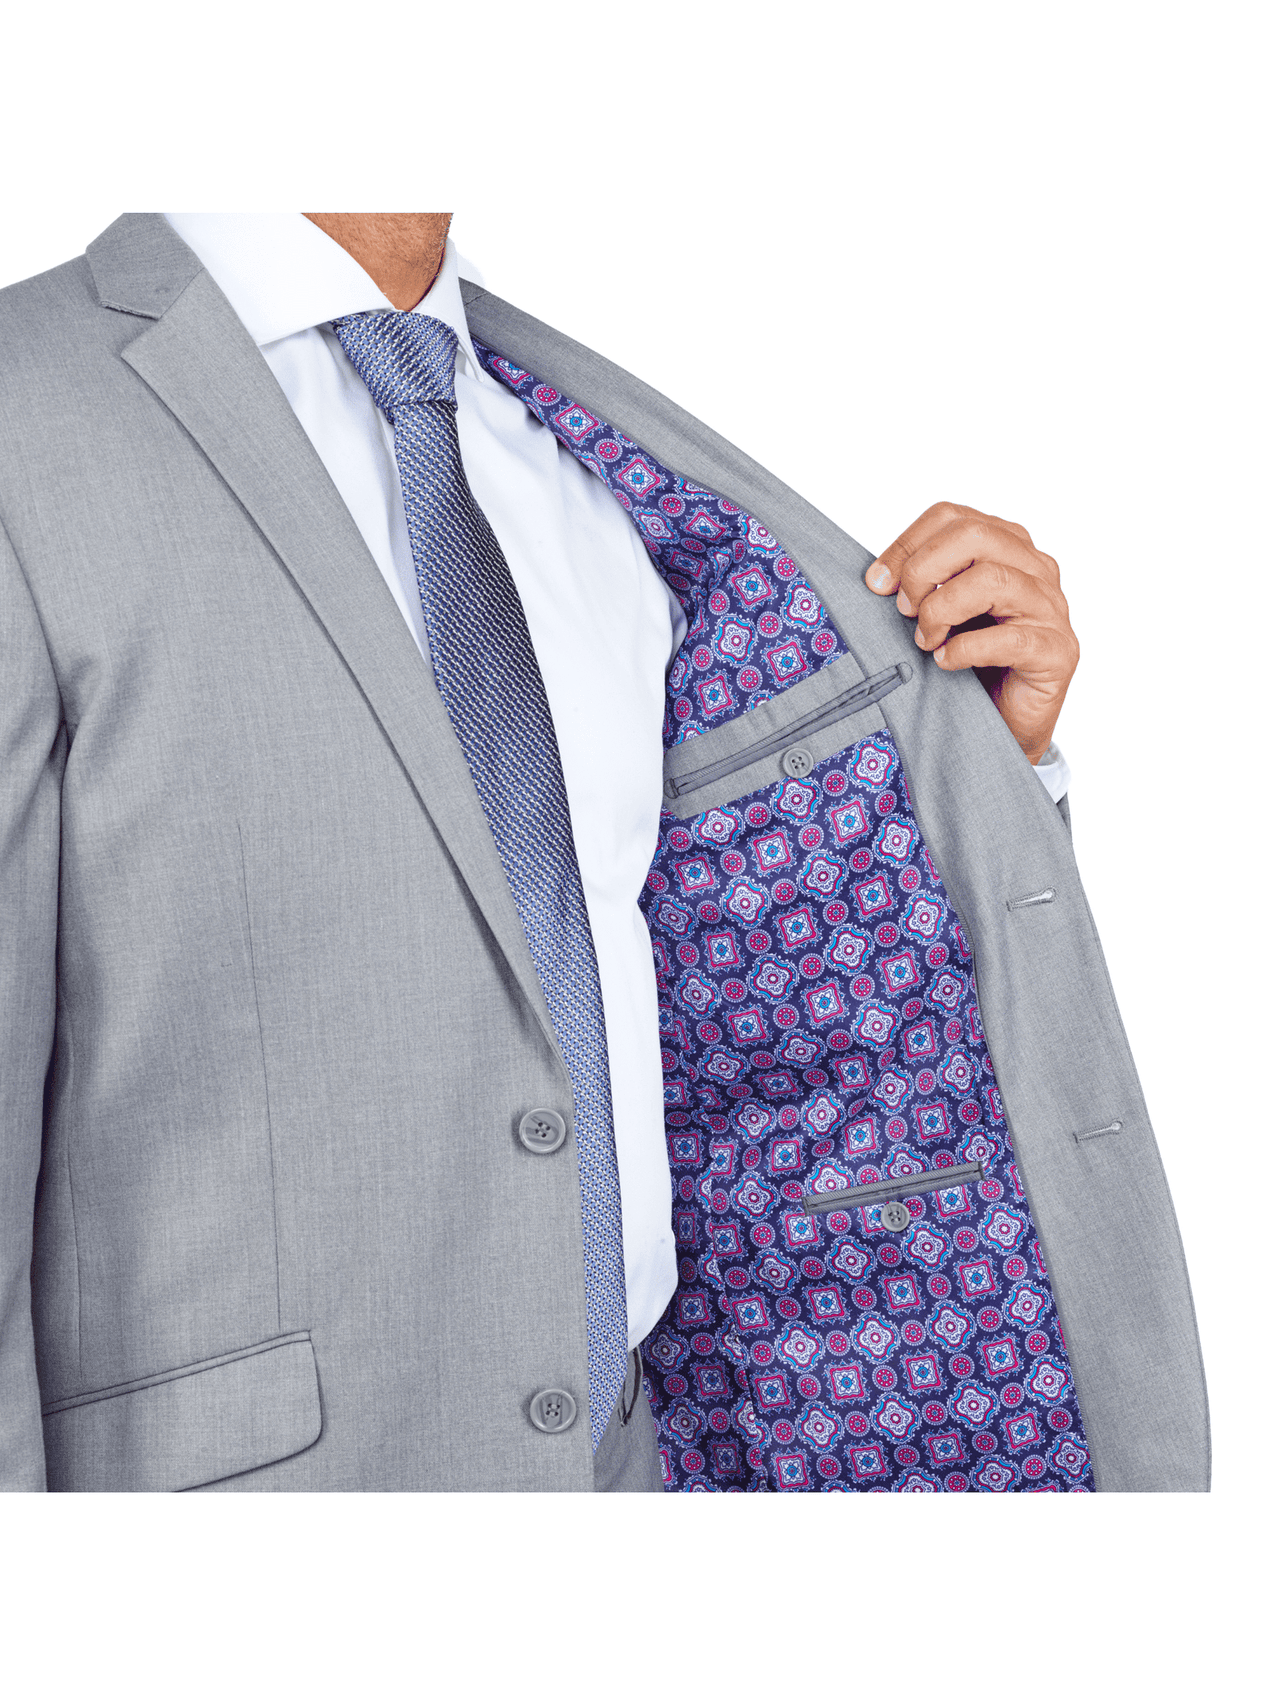 colorful lining of light gray men's suit jacket